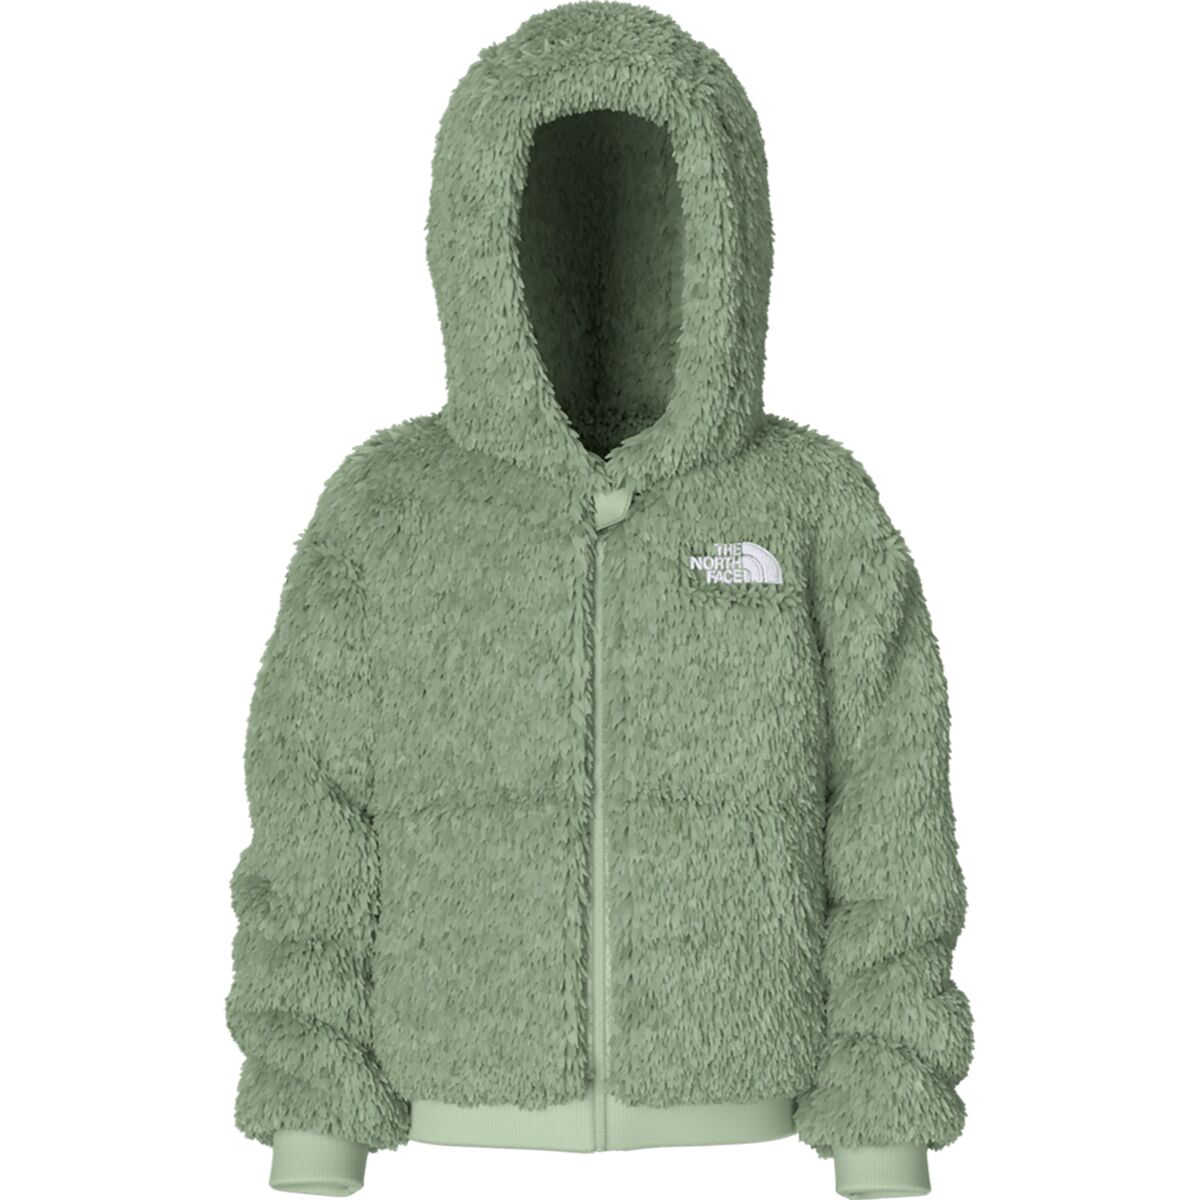 The North Face Suave Oso Full-Zip Hoodie - Toddlers'